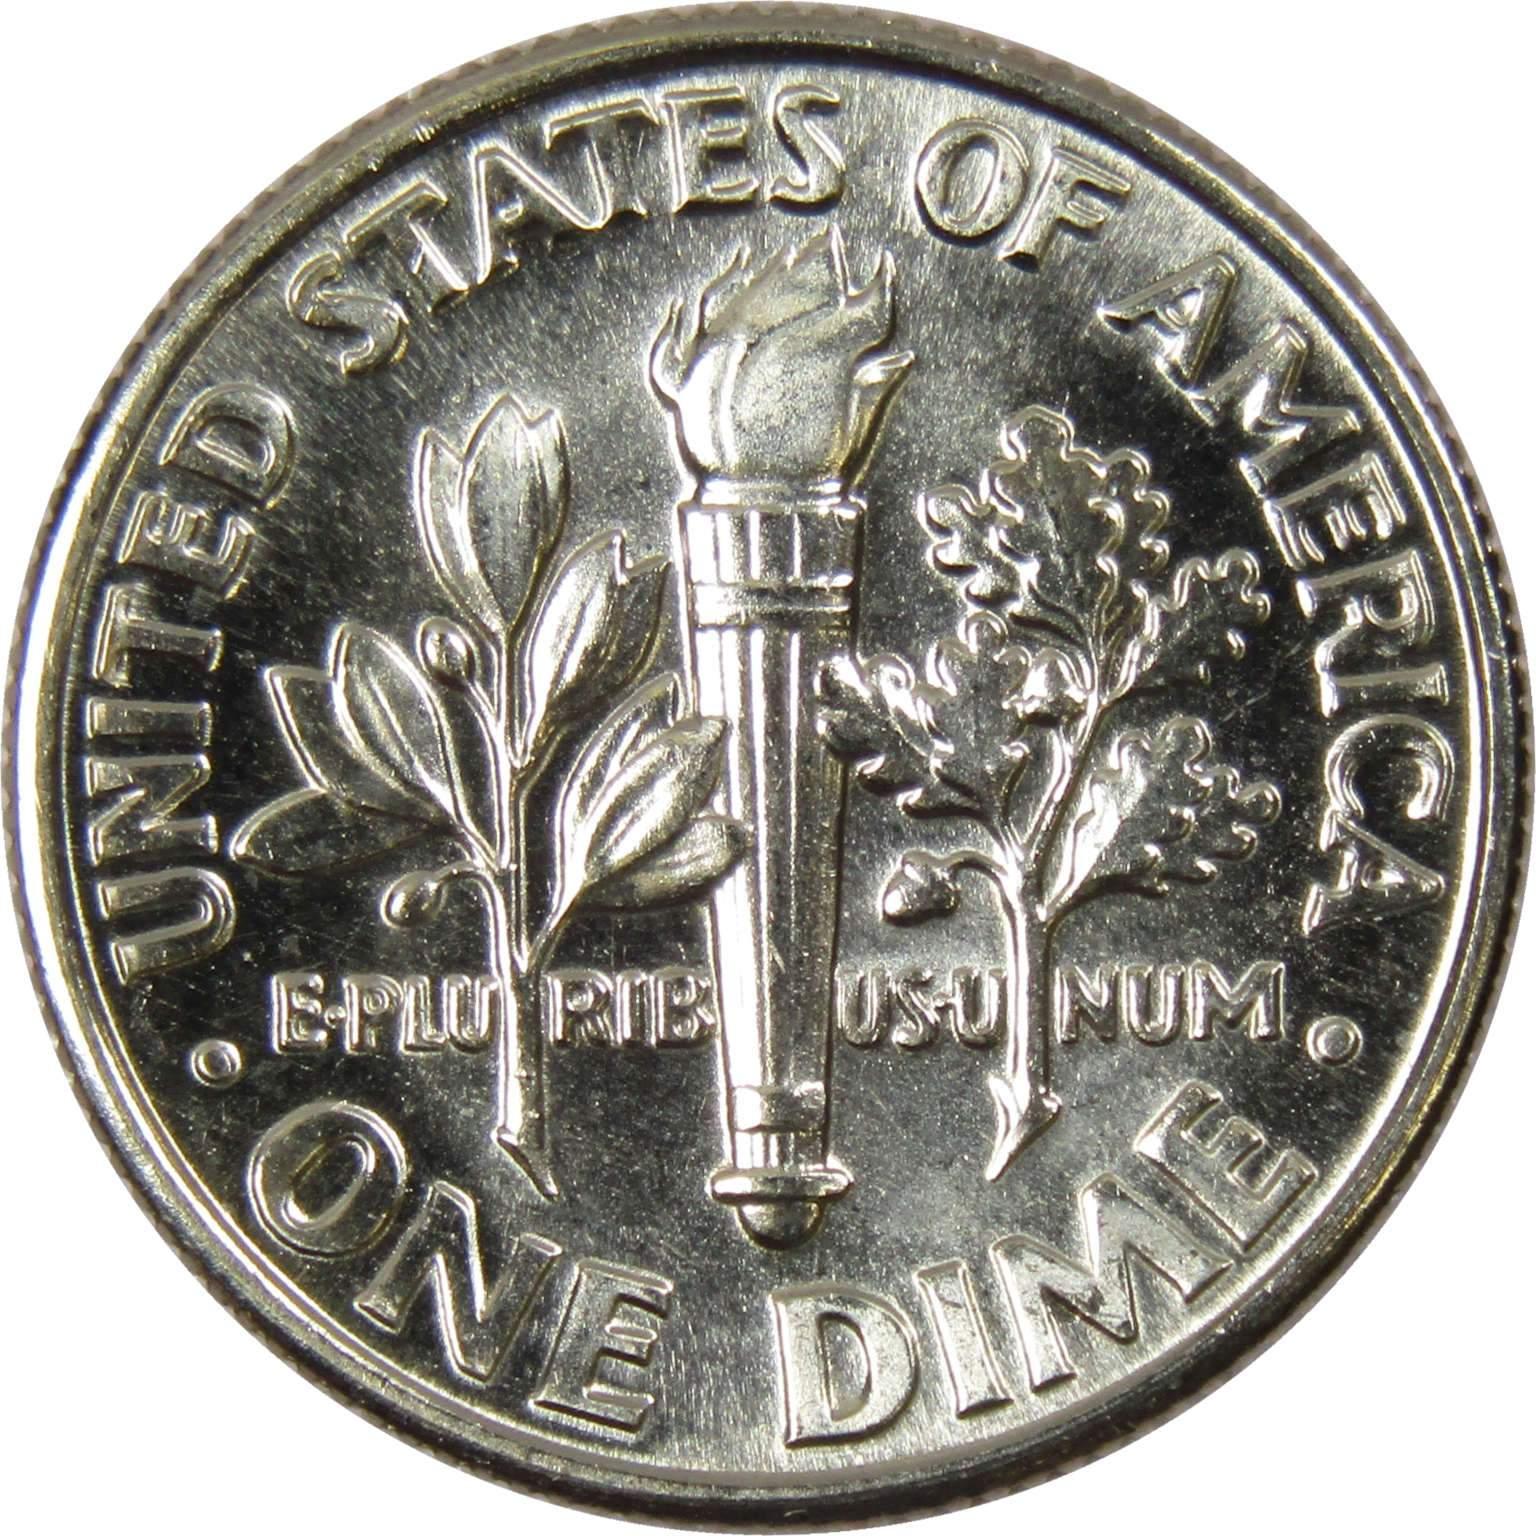 1990 D Roosevelt Dime BU Uncirculated Mint State 10c US Coin Collectible